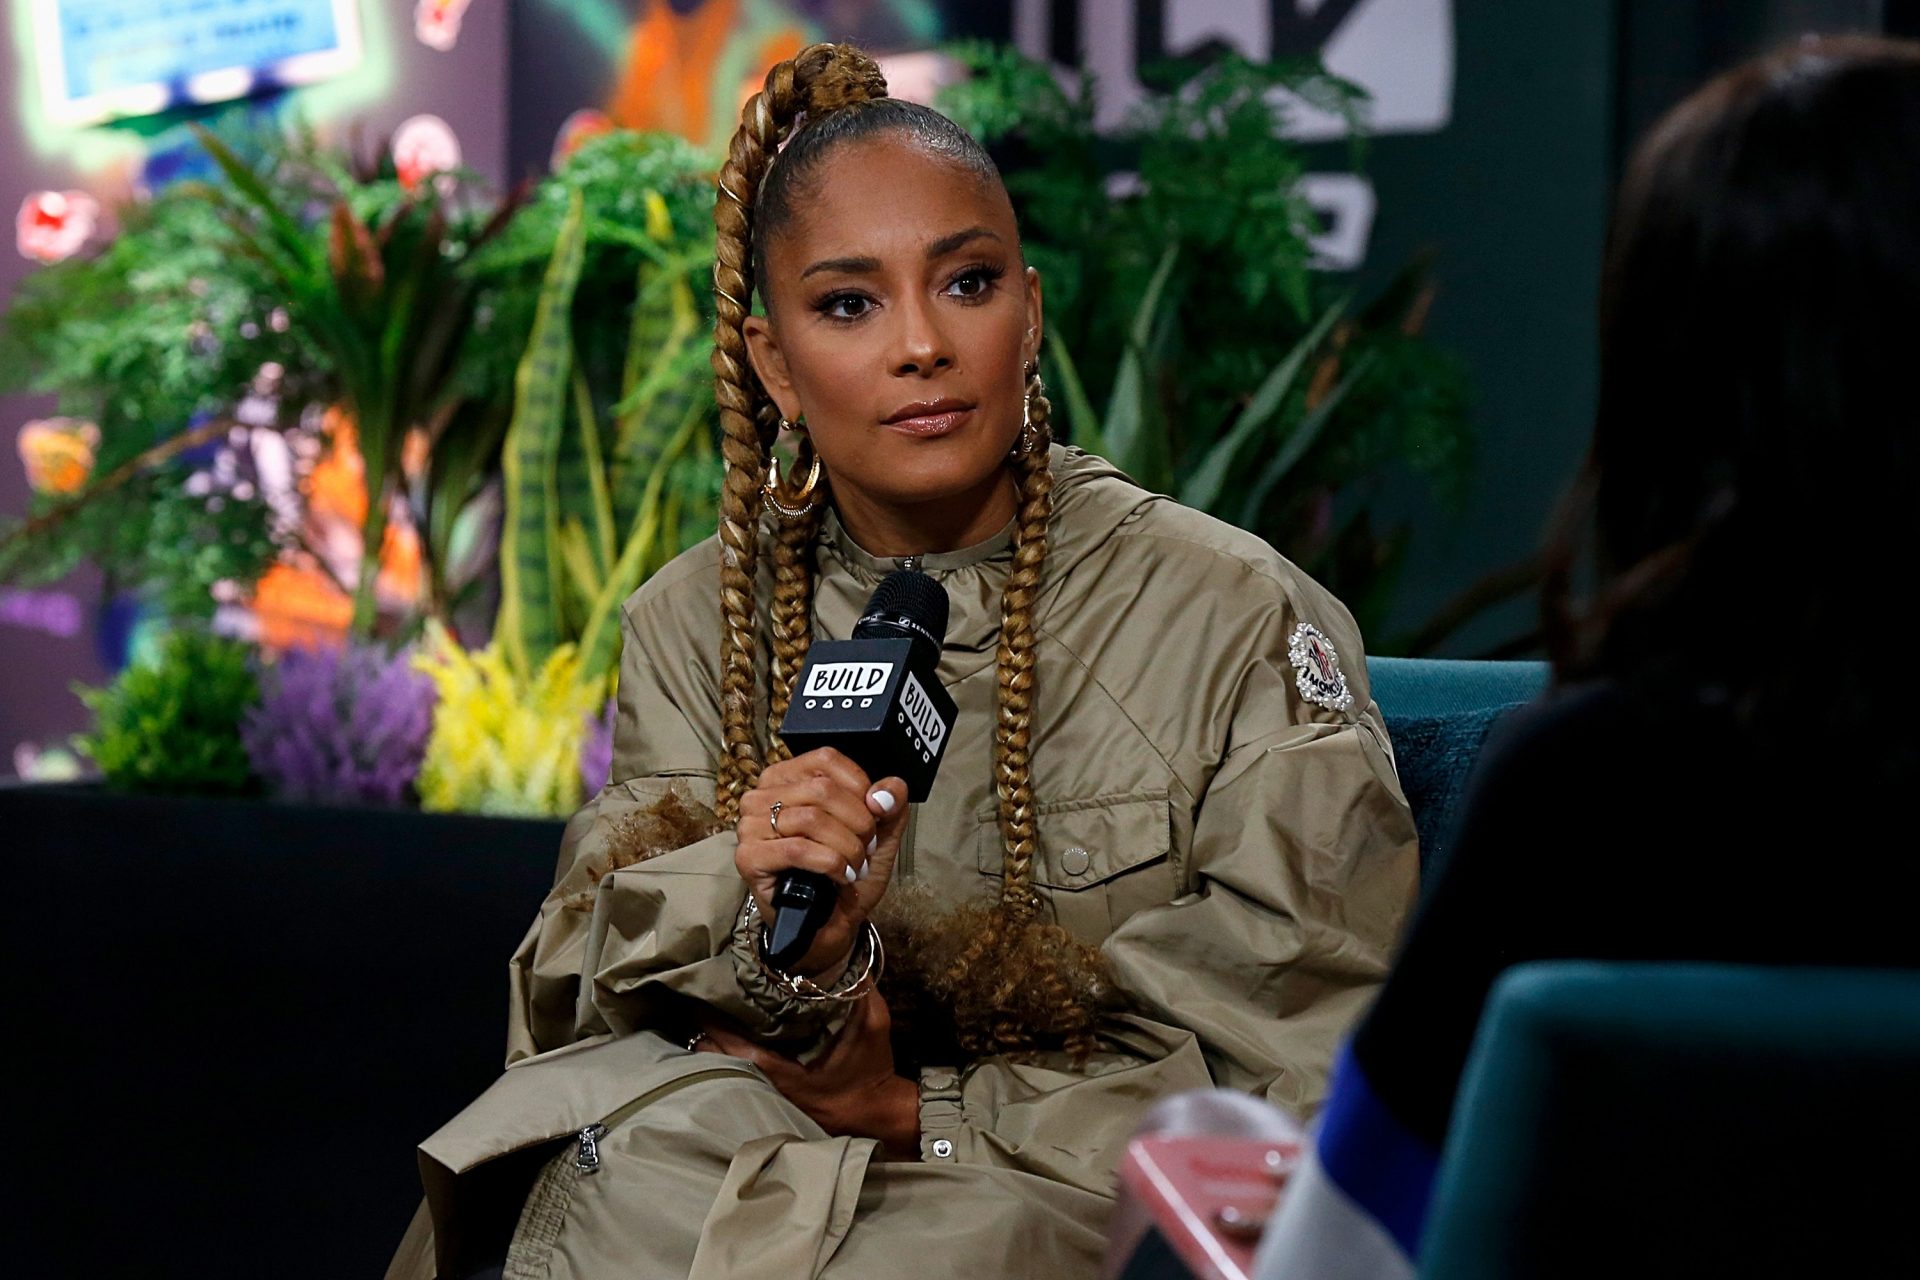 Amanda Seales Leaves Fox’s ‘The Exact’ After 6 Months, Hints There’s a Lack of Dark Voices at the Top